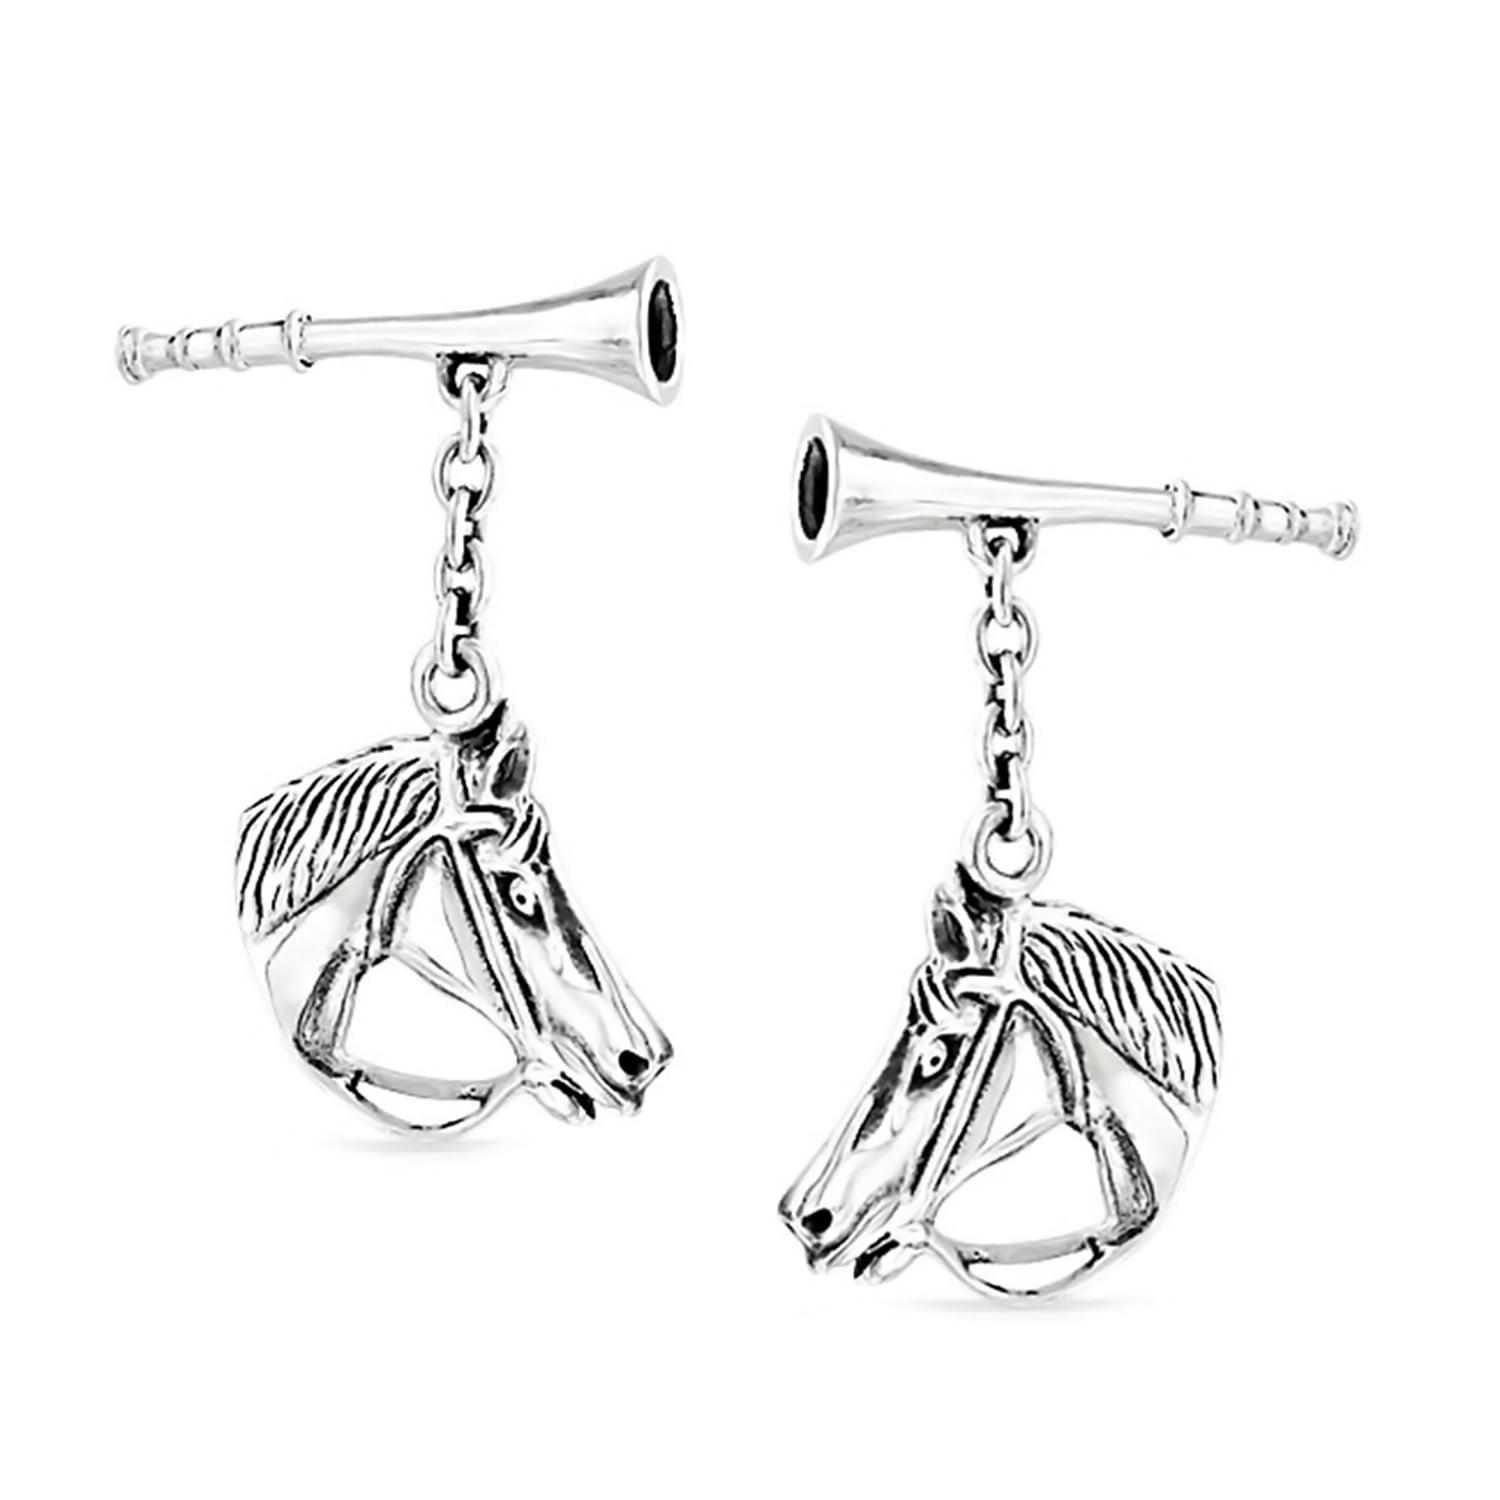 Museum Cufflinks and Studs Silver Finish 